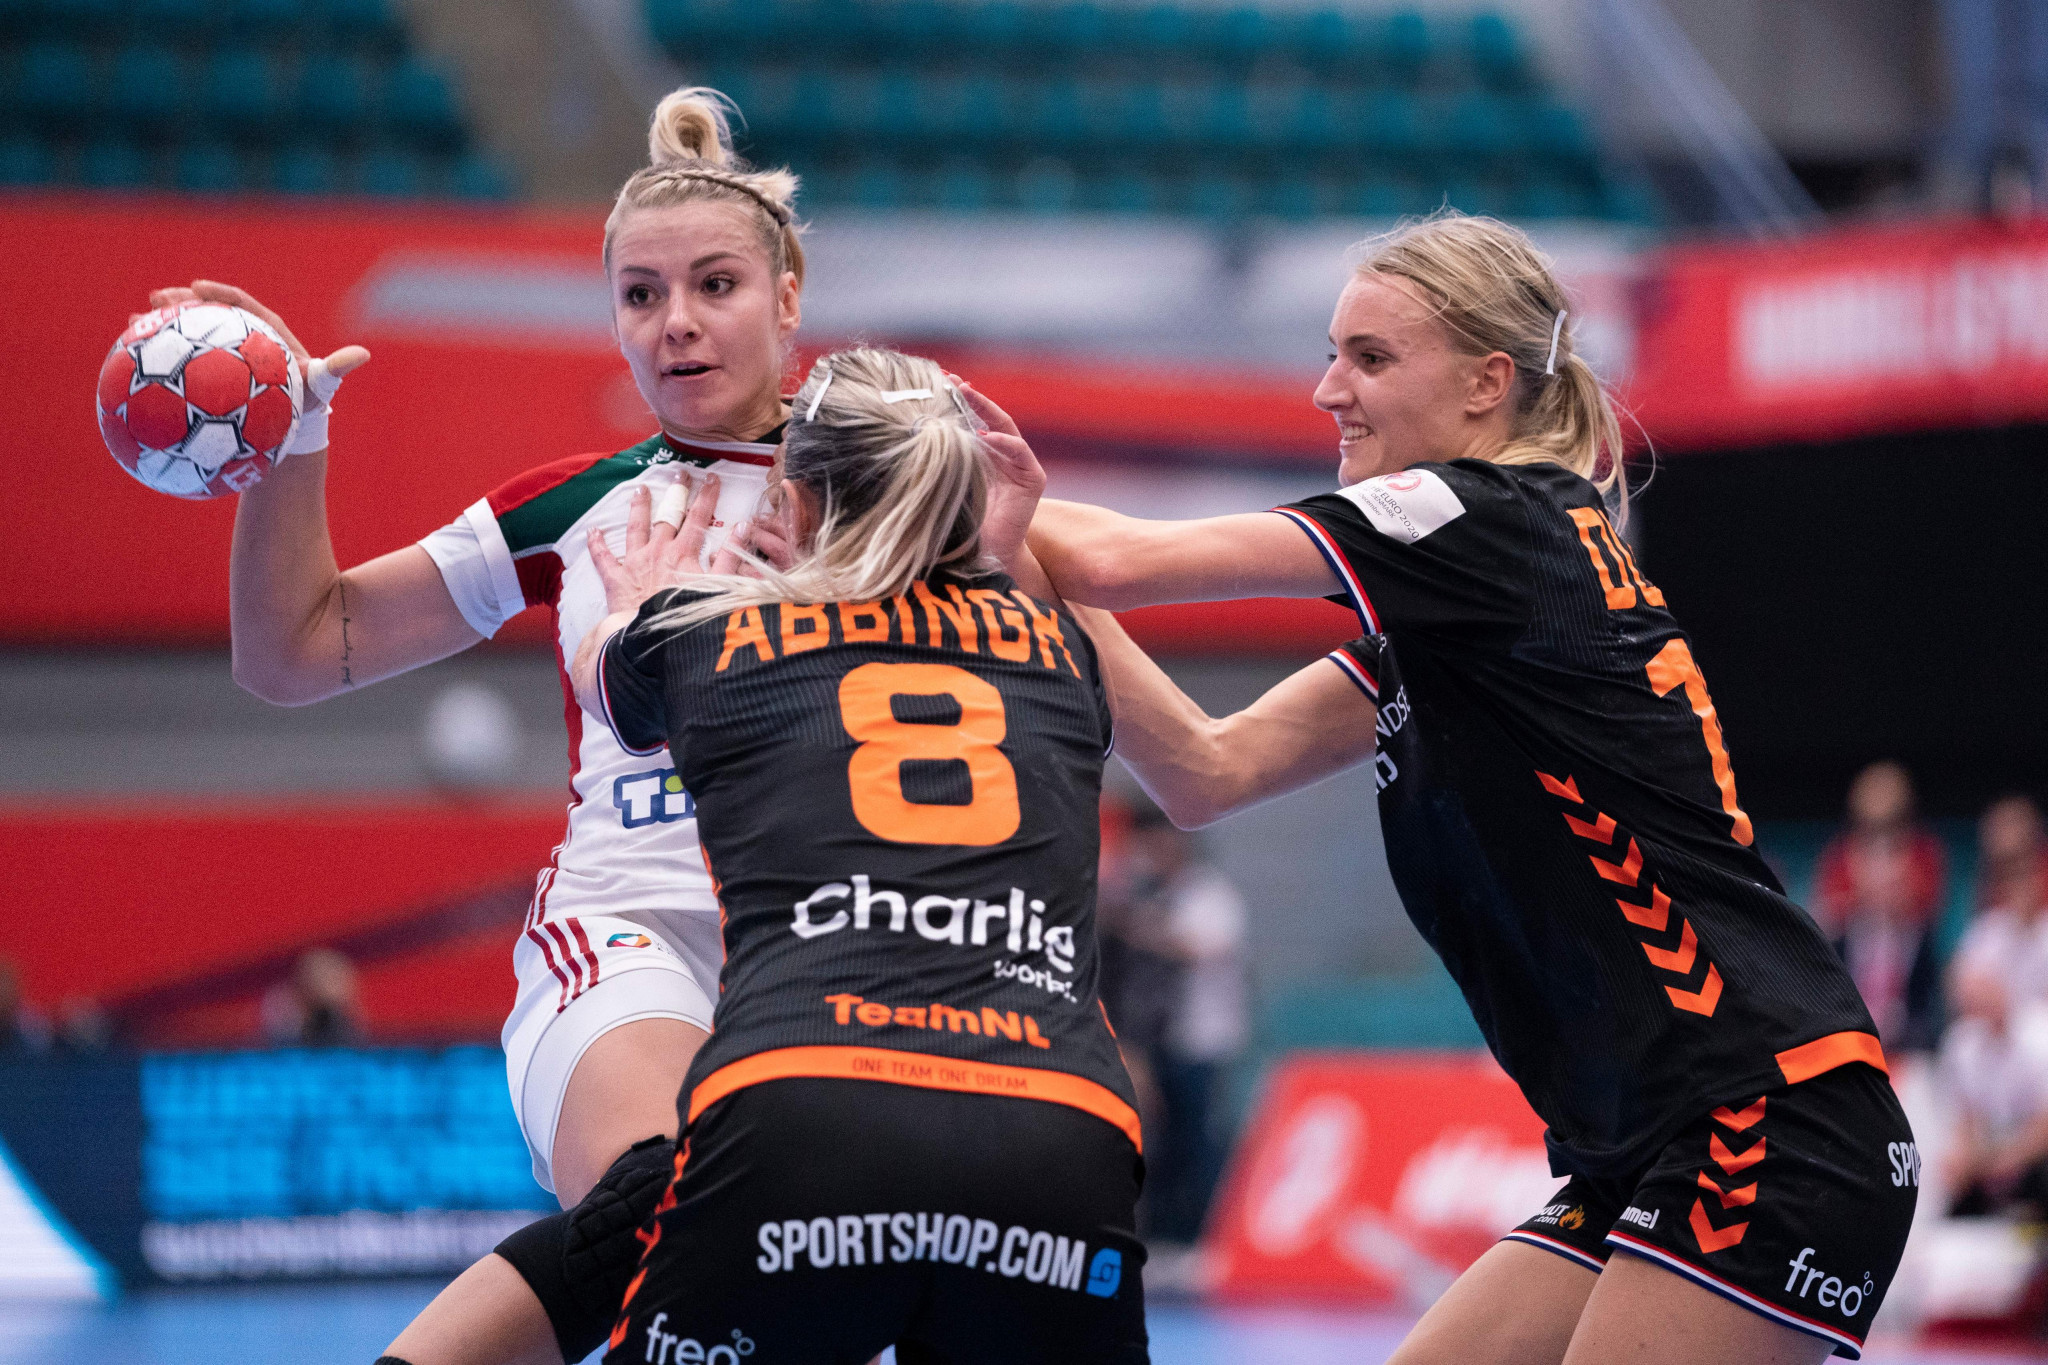 World champions The Netherlands (in black) defeated Hungary to ensure their qualification through to the next stage of EHF Euro 2020 ©Getty Images